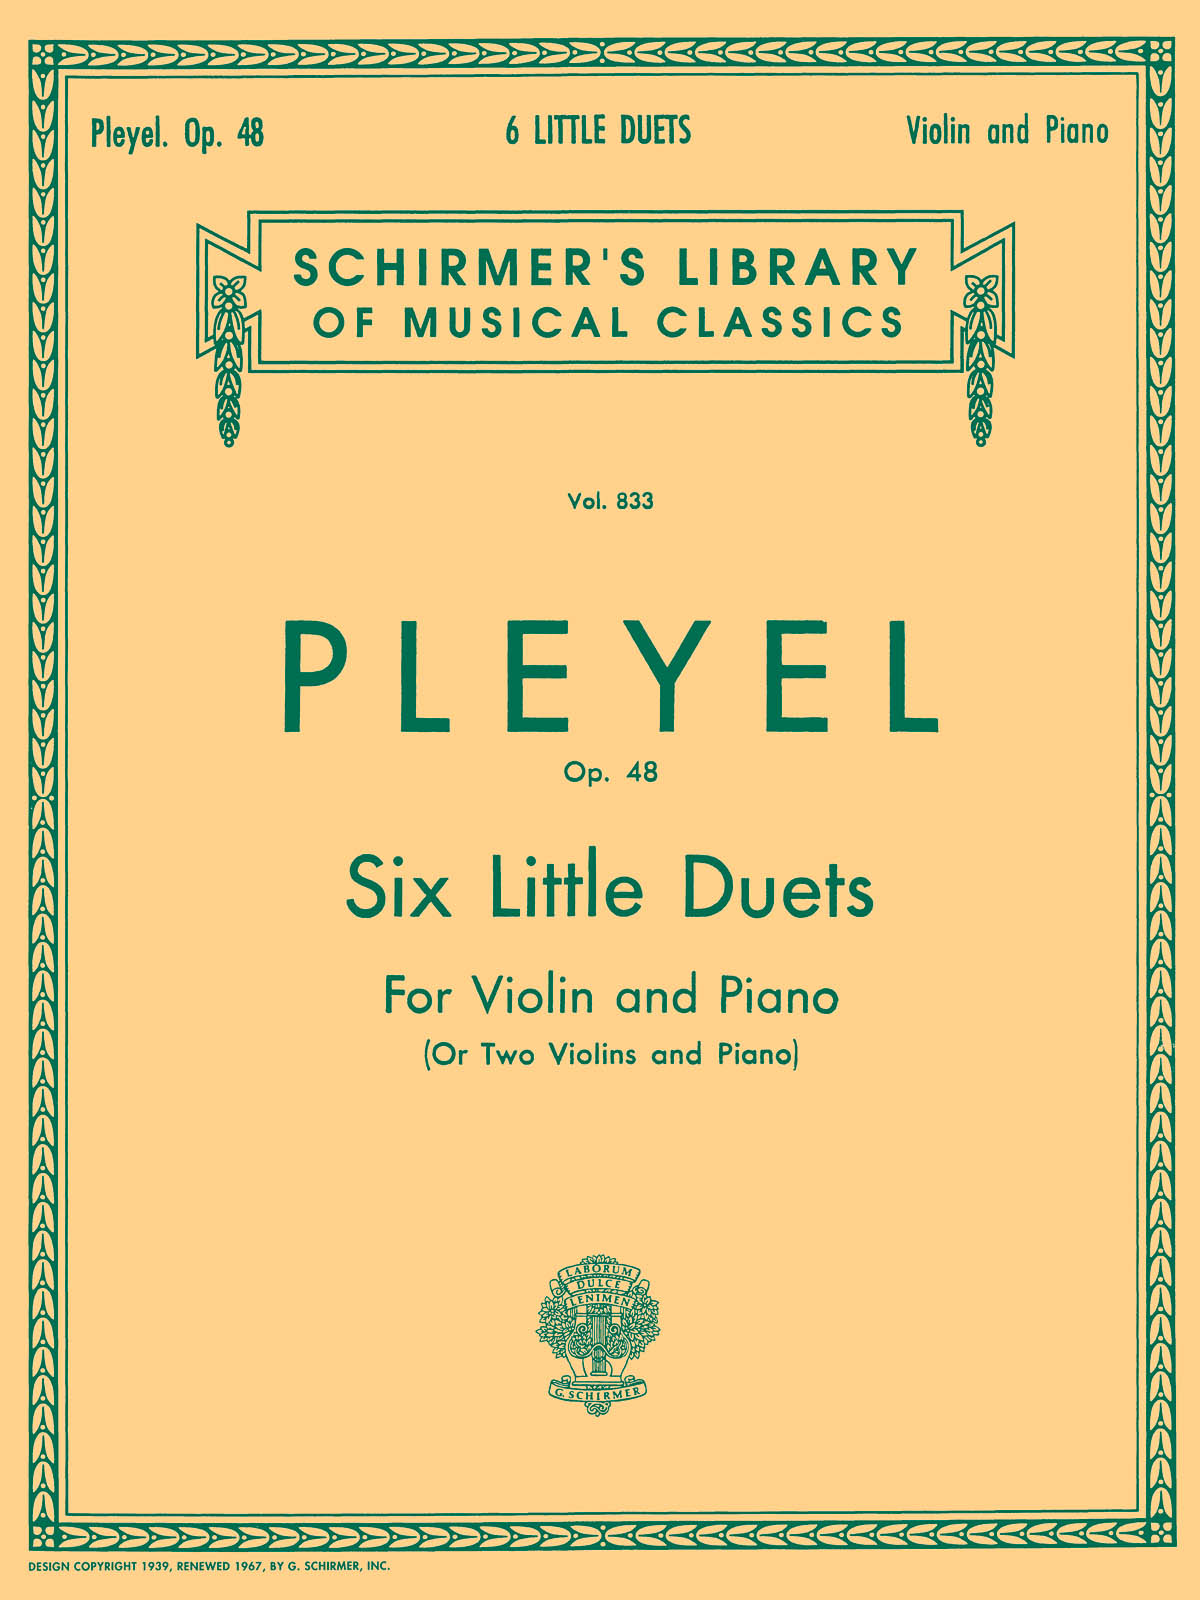 Pleyel 6 Little Duets For Violin And Piano Op. 48